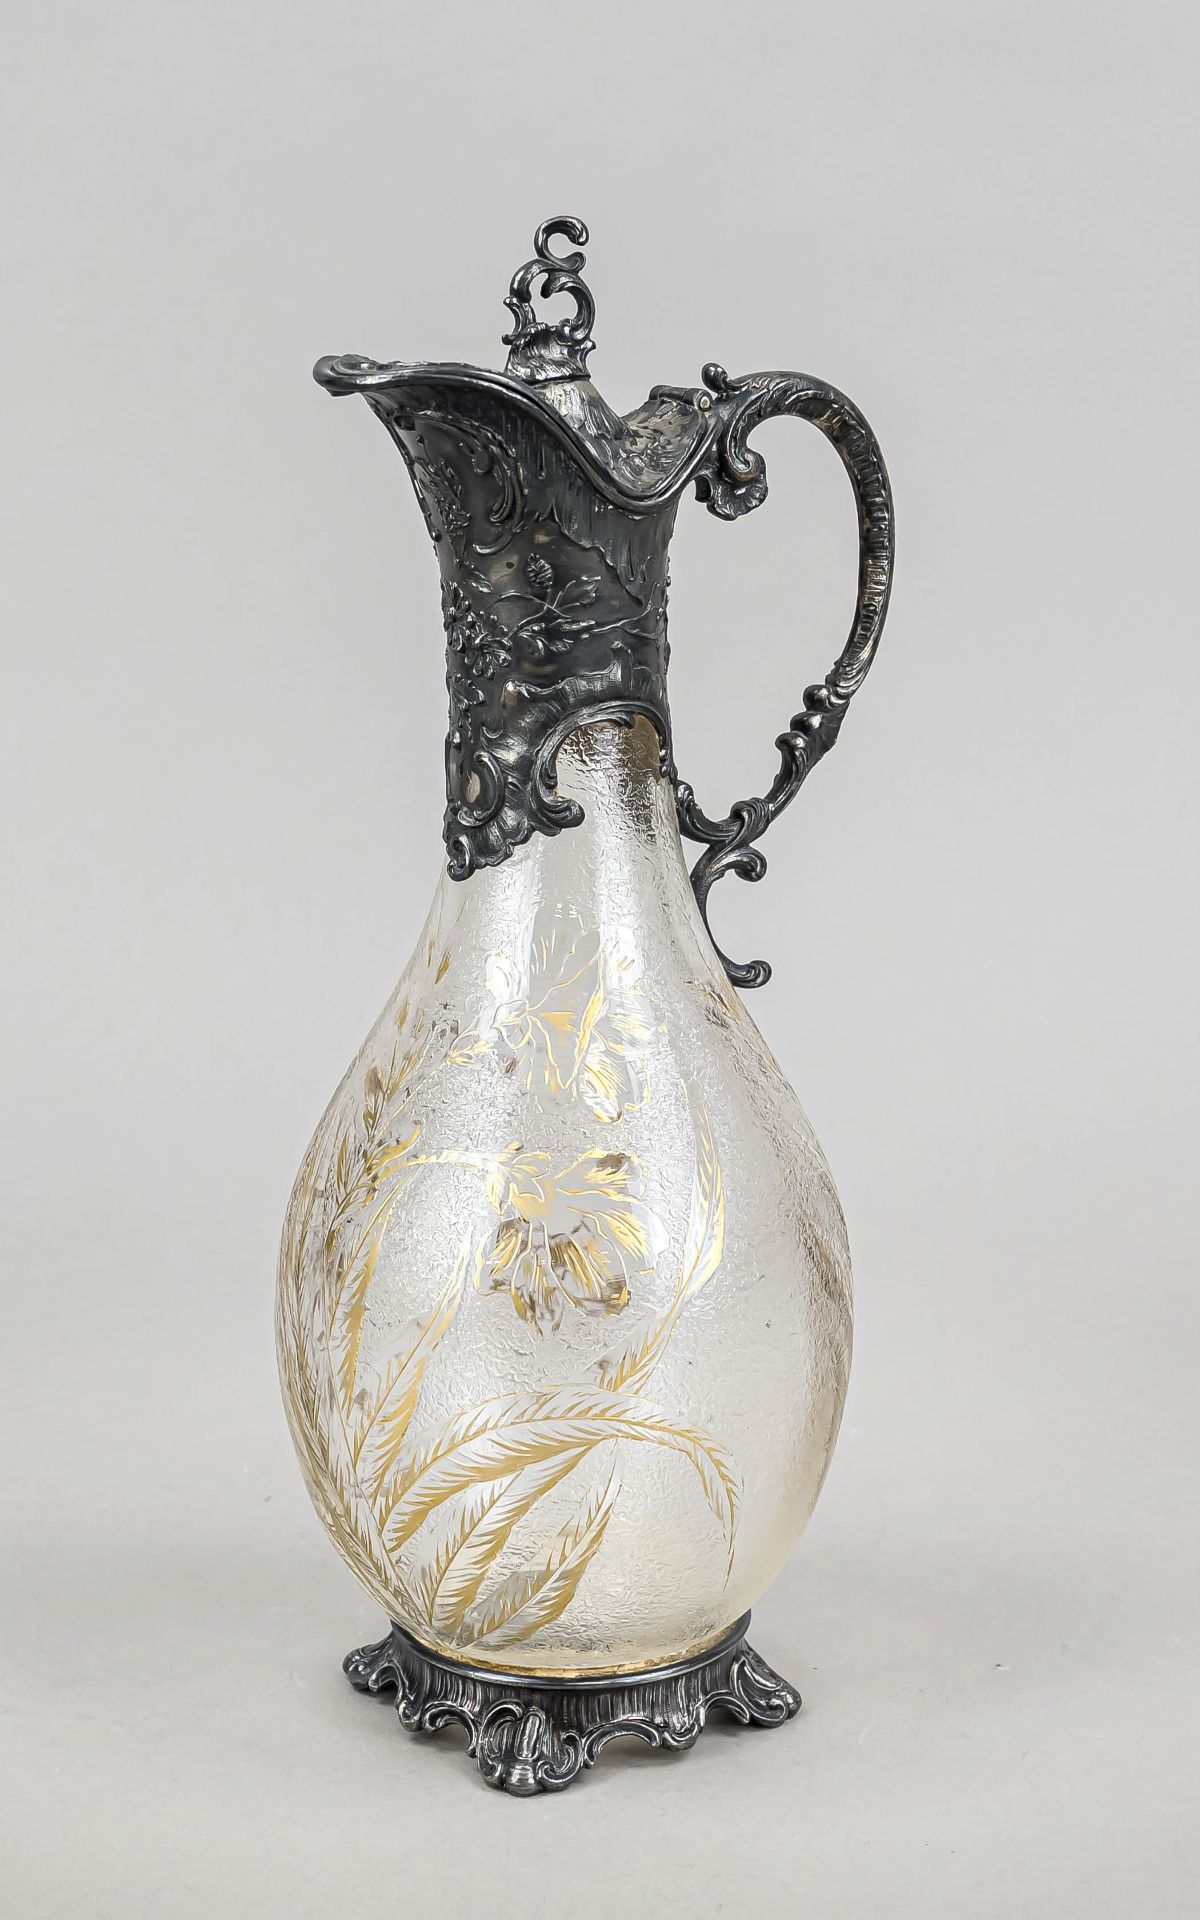 Art Nouveau decanter with pewter mounting, c. 1900, round curved stand, hinged lid mounting with